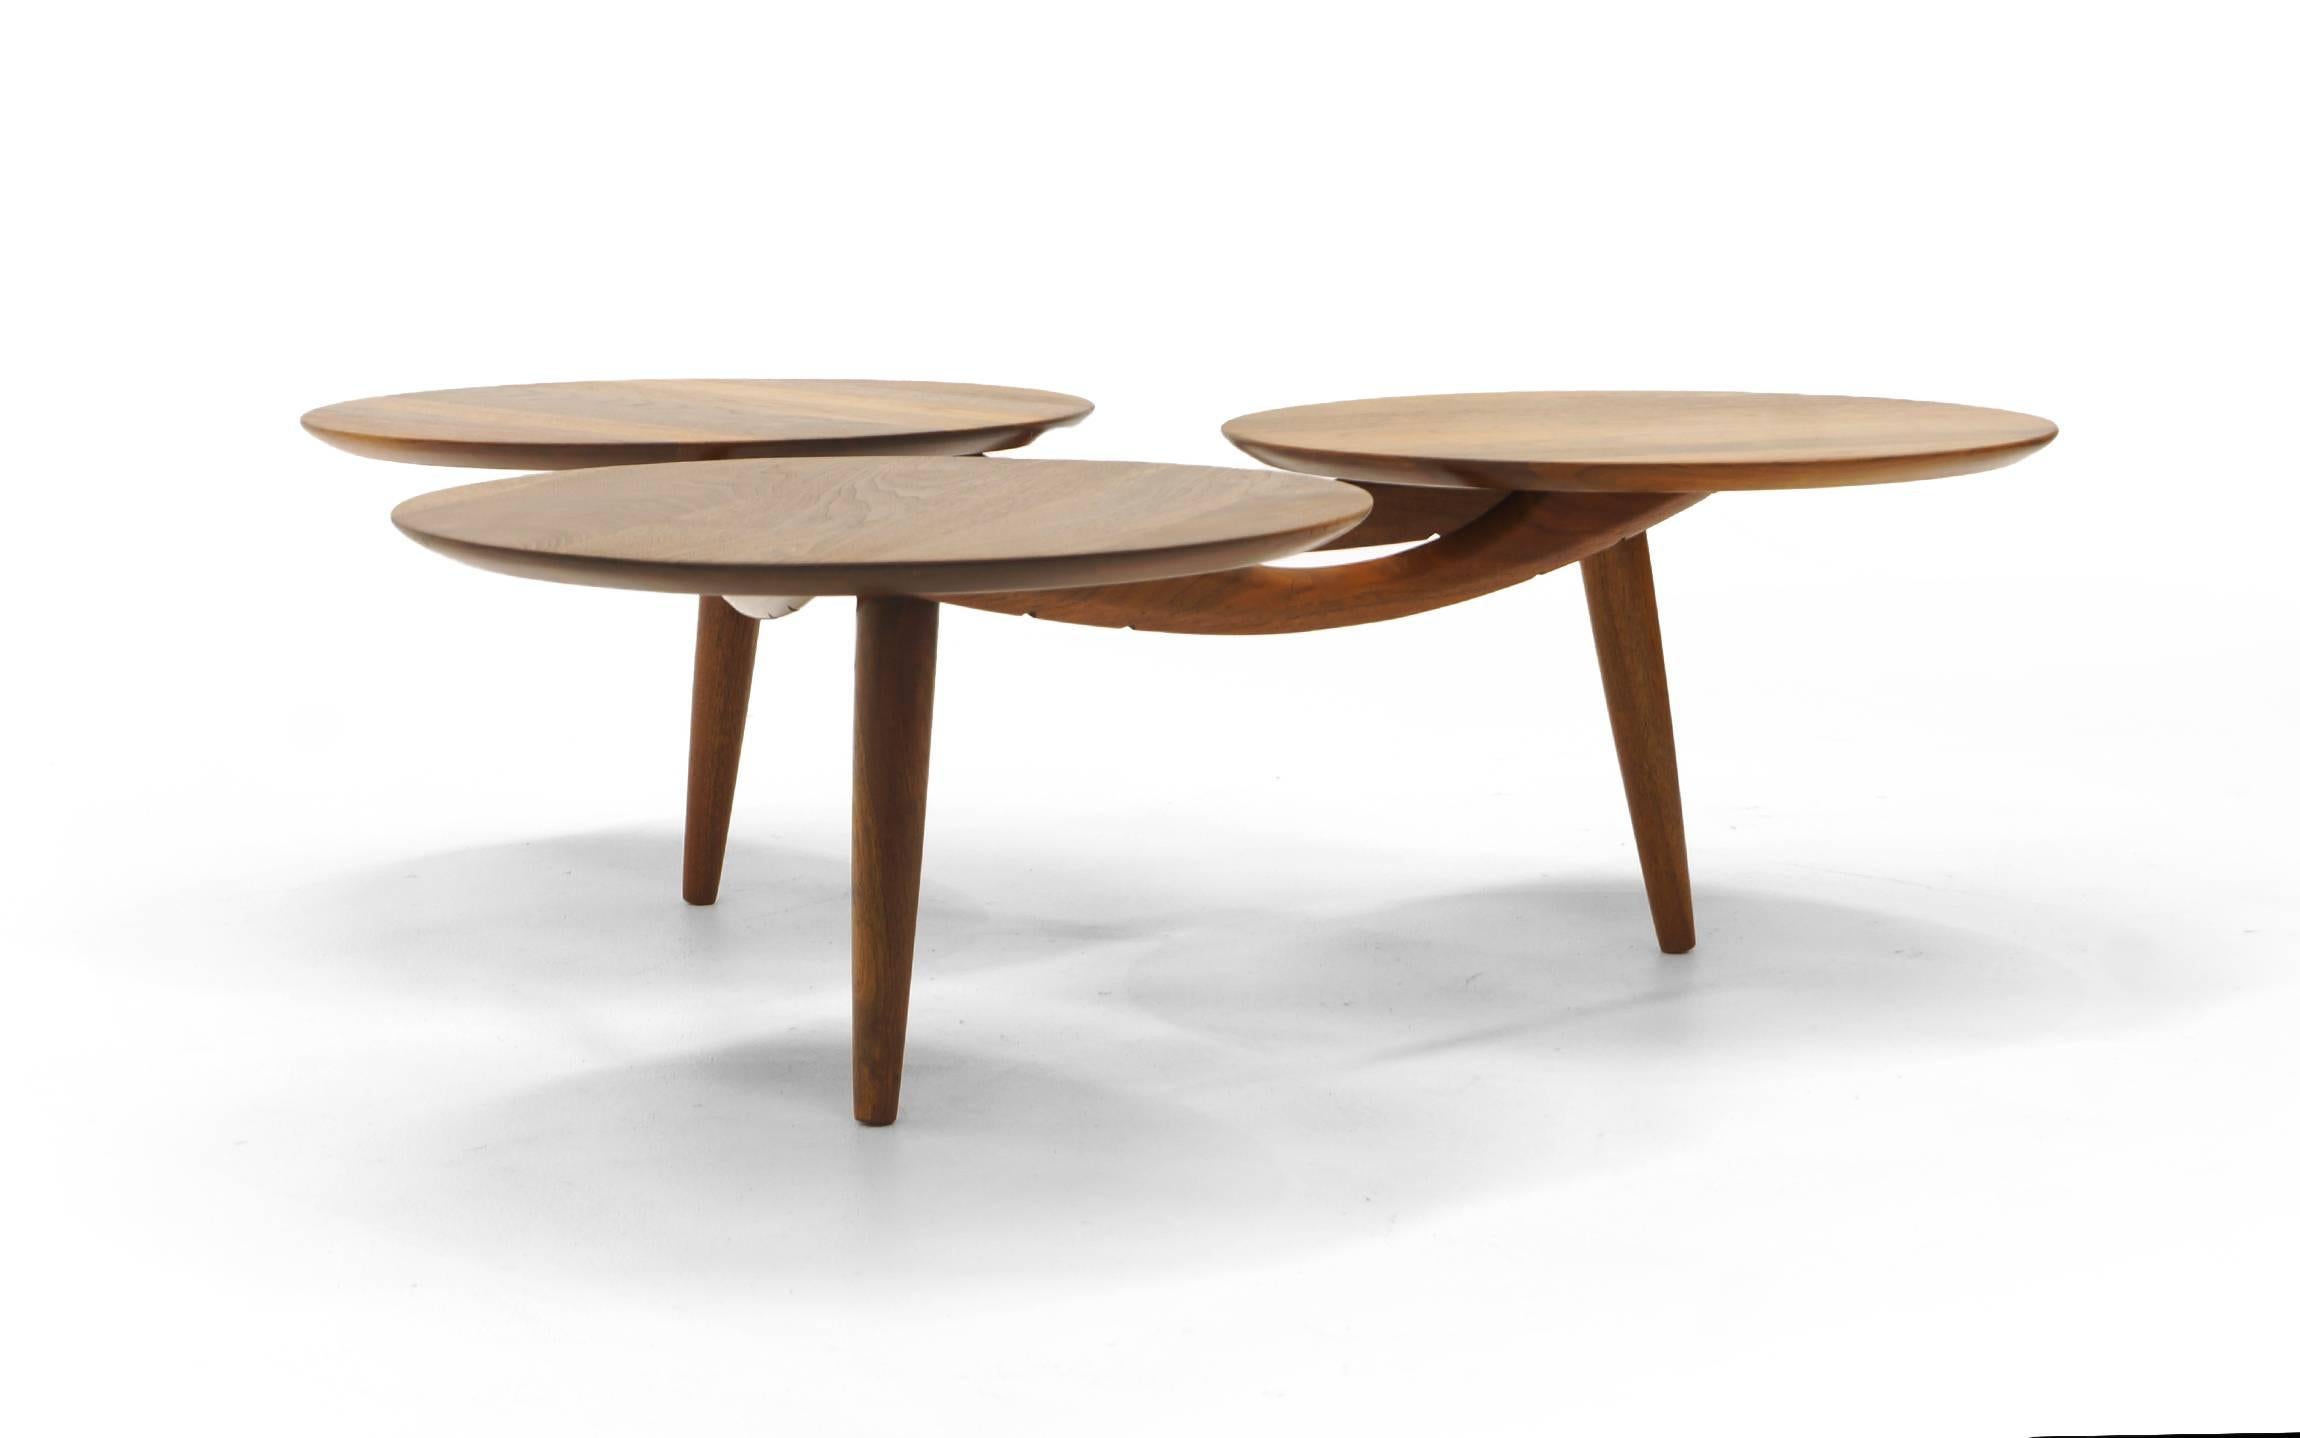 Unusual and striking Danish solid teak coffee table. Three round teak surfaces attached to a teak base. Overall forms a triangular footprint. Expertly restored and refinished.